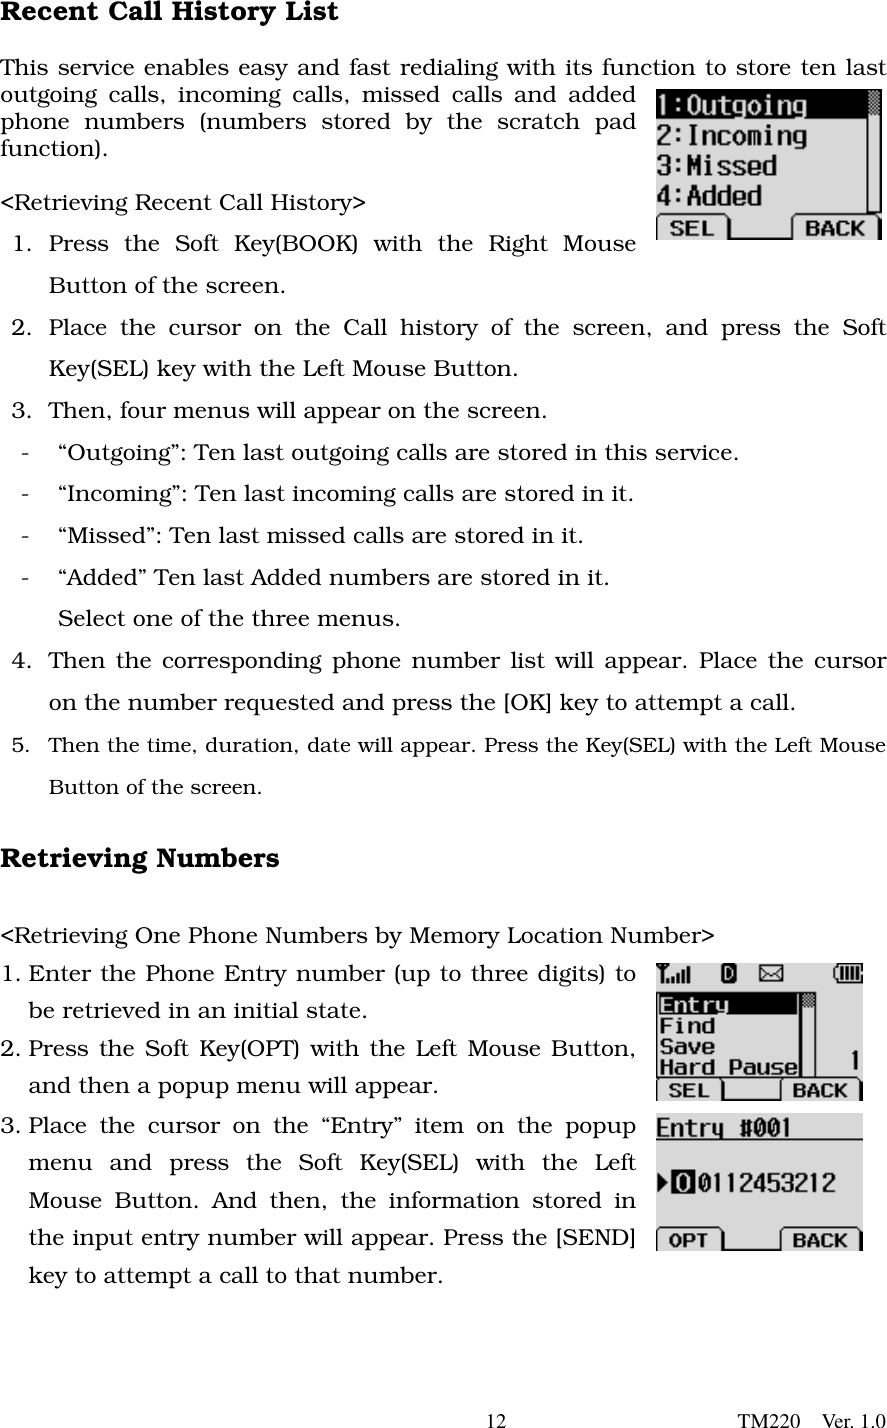       12                      TM220  Ver. 1.0 Recent Call History List   This service enables easy and fast redialing with its function to store ten last outgoing calls, incoming calls, missed calls and added phone numbers (numbers stored by the scratch pad function).     &lt;Retrieving Recent Call History&gt;   1. Press the Soft Key(BOOK) with the Right Mouse Button of the screen. 2. Place the cursor on the Call history of the screen, and press the Soft Key(SEL) key with the Left Mouse Button.   3.  Then, four menus will appear on the screen.   -  “Outgoing”: Ten last outgoing calls are stored in this service.   -  “Incoming”: Ten last incoming calls are stored in it. -  “Missed”: Ten last missed calls are stored in it.   -  “Added” Ten last Added numbers are stored in it.   Select one of the three menus.   4.  Then the corresponding phone number list will appear. Place the cursor on the number requested and press the [OK] key to attempt a call. 5.  Then the time, duration, date will appear. Press the Key(SEL) with the Left Mouse Button of the screen.    Retrieving Numbers  &lt;Retrieving One Phone Numbers by Memory Location Number&gt; 1. Enter the Phone Entry number (up to three digits) to be retrieved in an initial state.   2. Press the Soft Key(OPT) with the Left Mouse Button, and then a popup menu will appear.   3. Place the cursor on the “Entry” item on the popup menu and press the Soft Key(SEL) with the Left Mouse Button. And then, the information stored in the input entry number will appear. Press the [SEND] key to attempt a call to that number.      